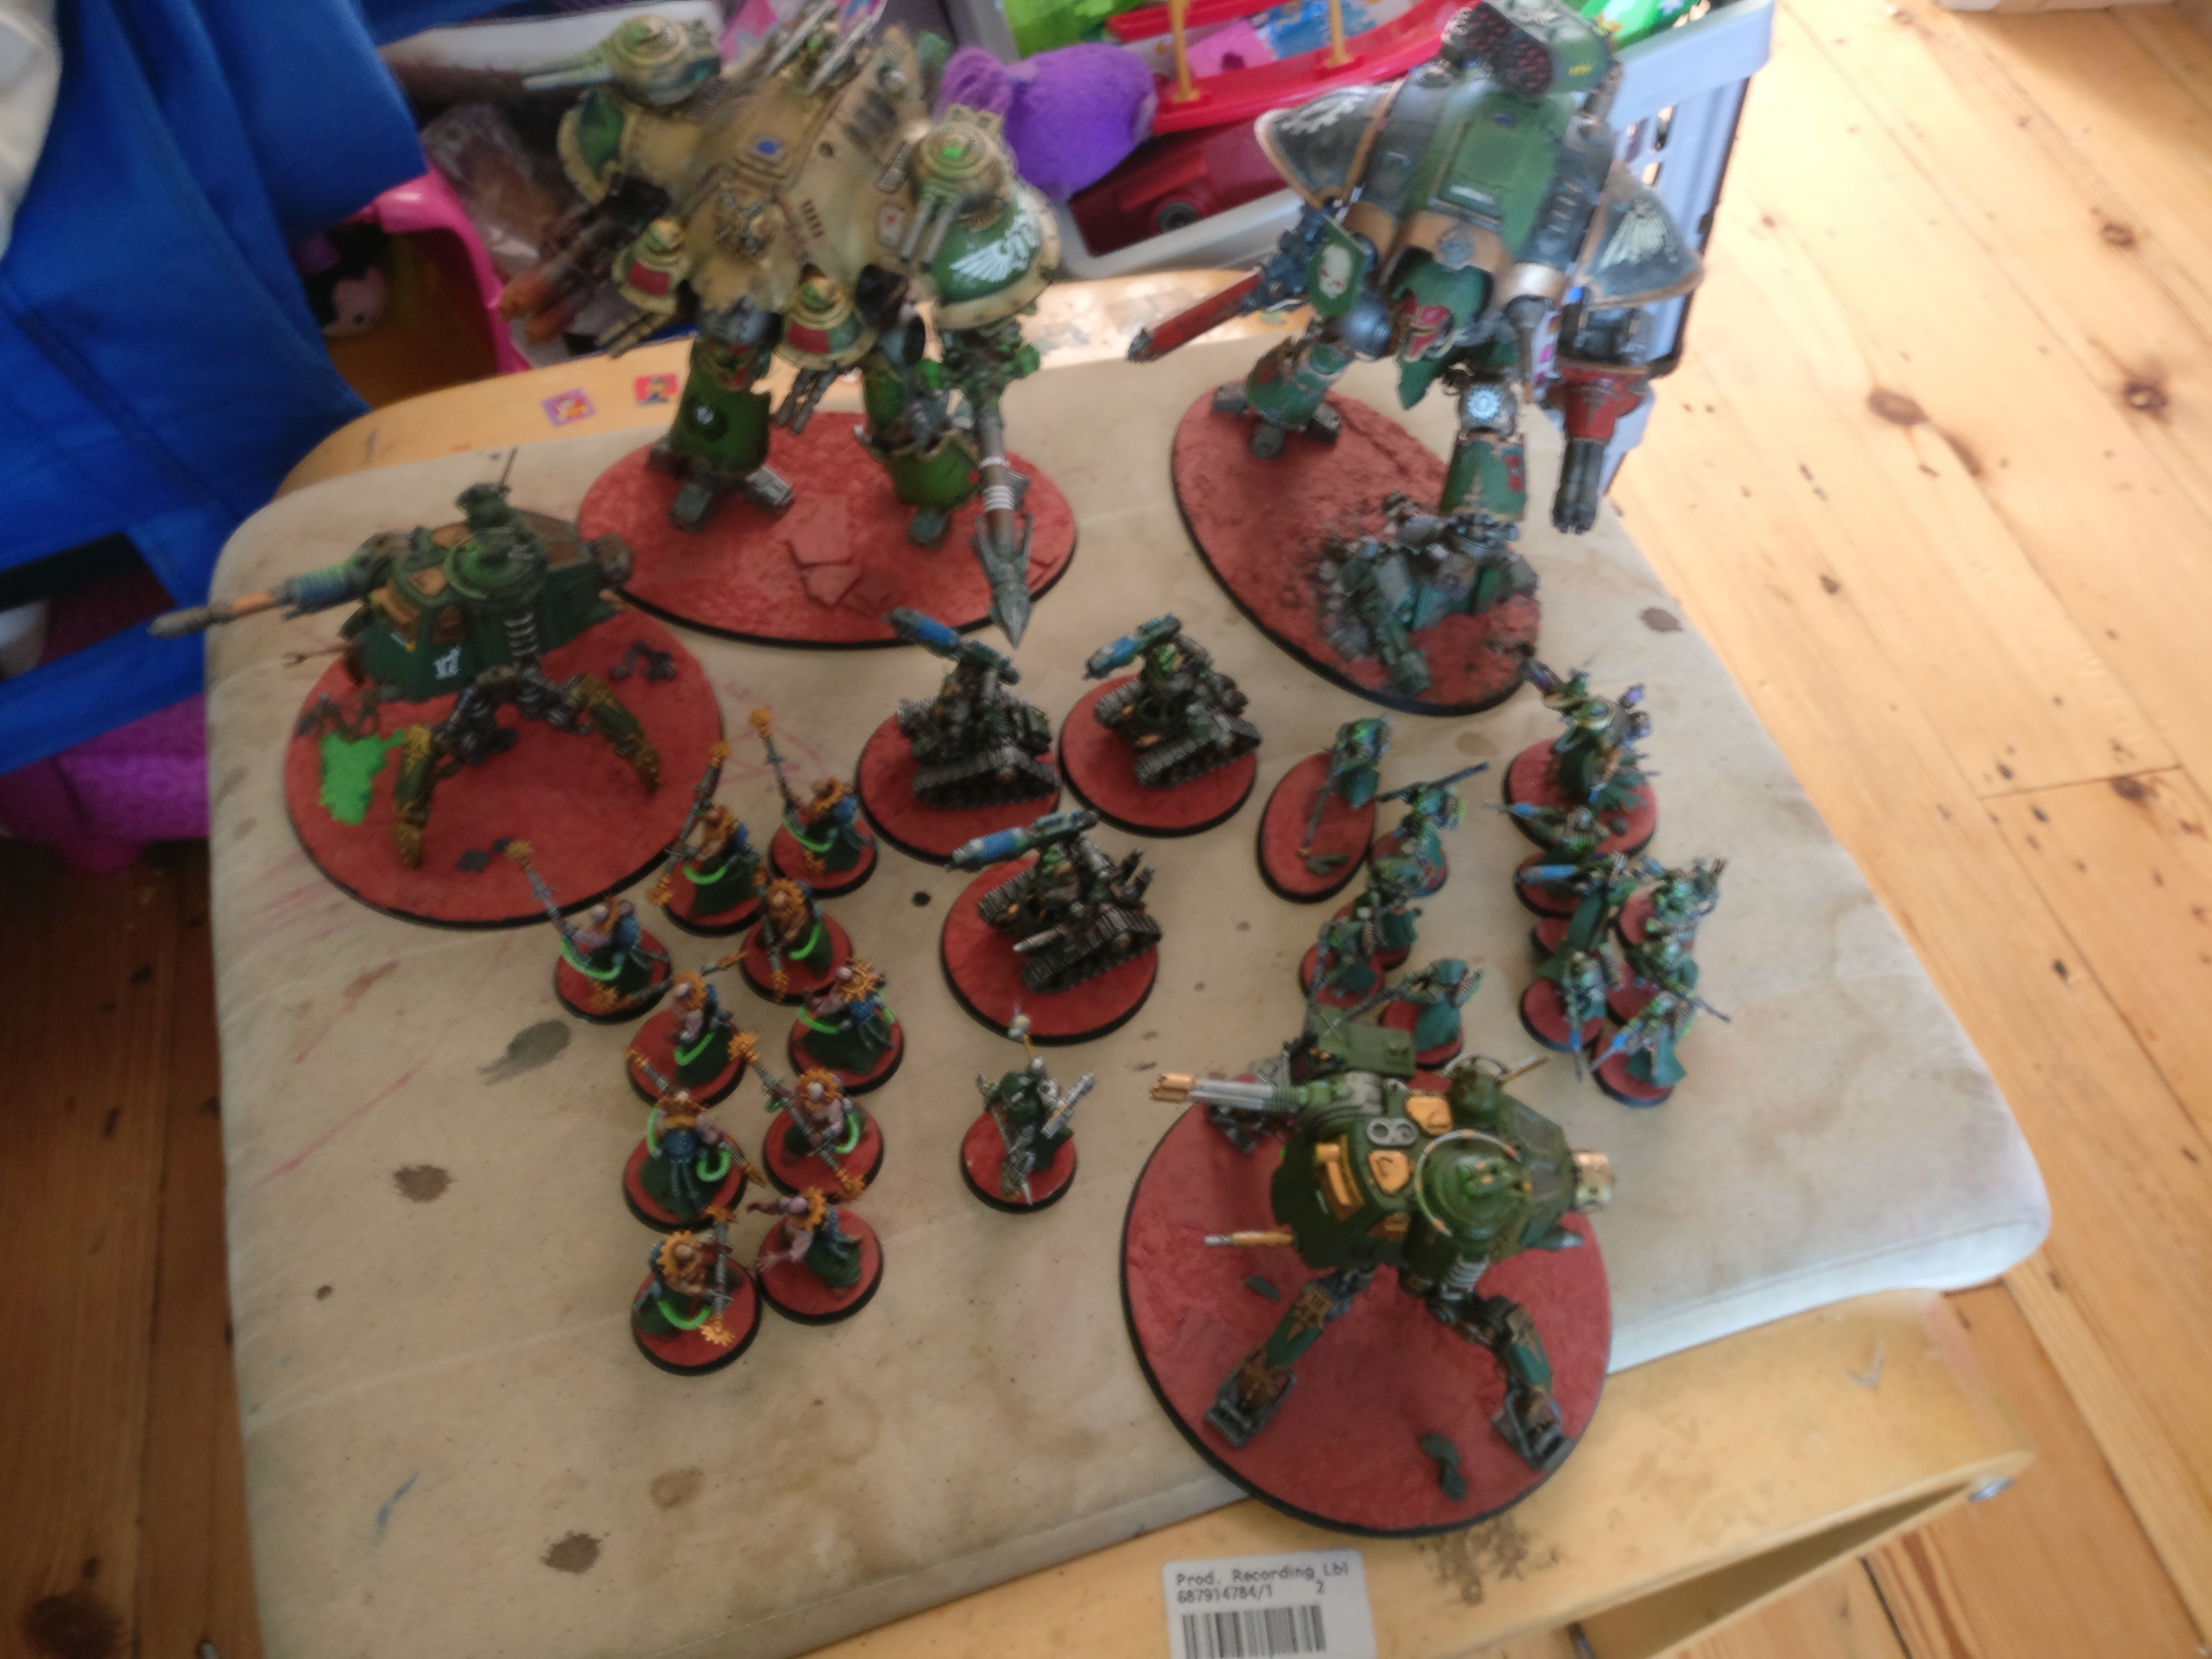 2000 points of AdMech and Knights for Warhammer 40k 8th edition 